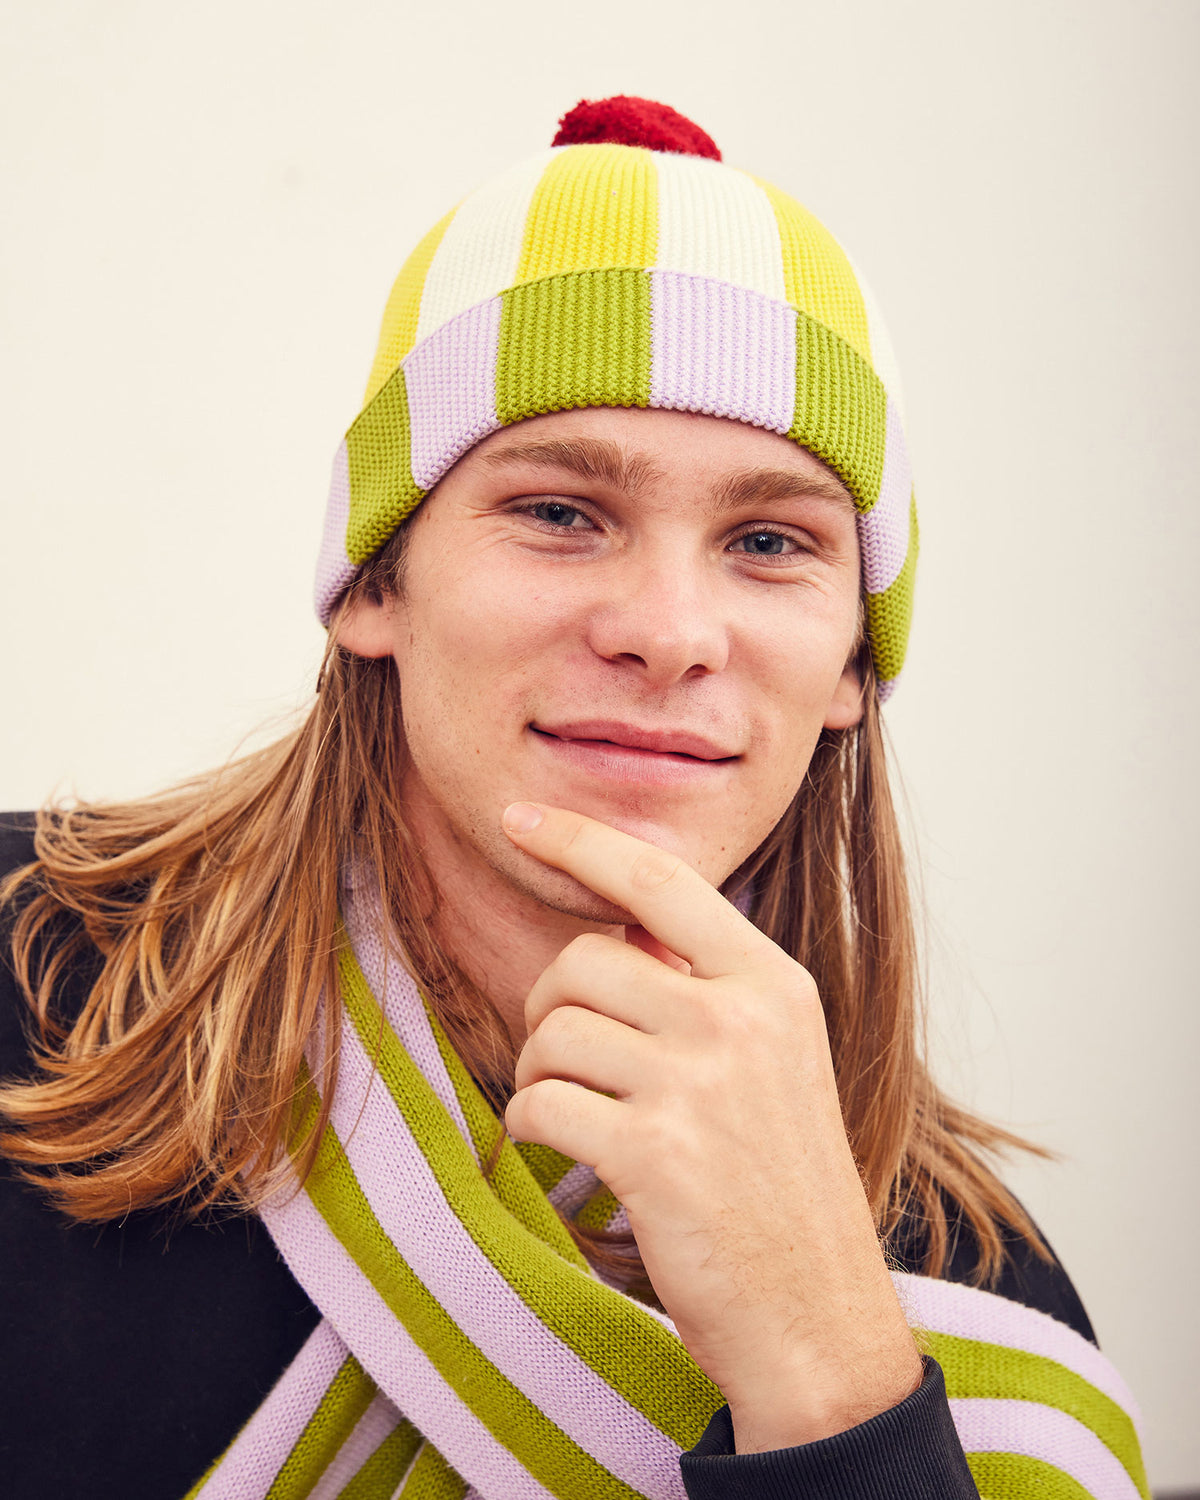 Squash Stripe Hat. Ribbed-knit pom beanie with contrasting yellow, white, lilac, and green stripes. 100% Cotton. Made in China.